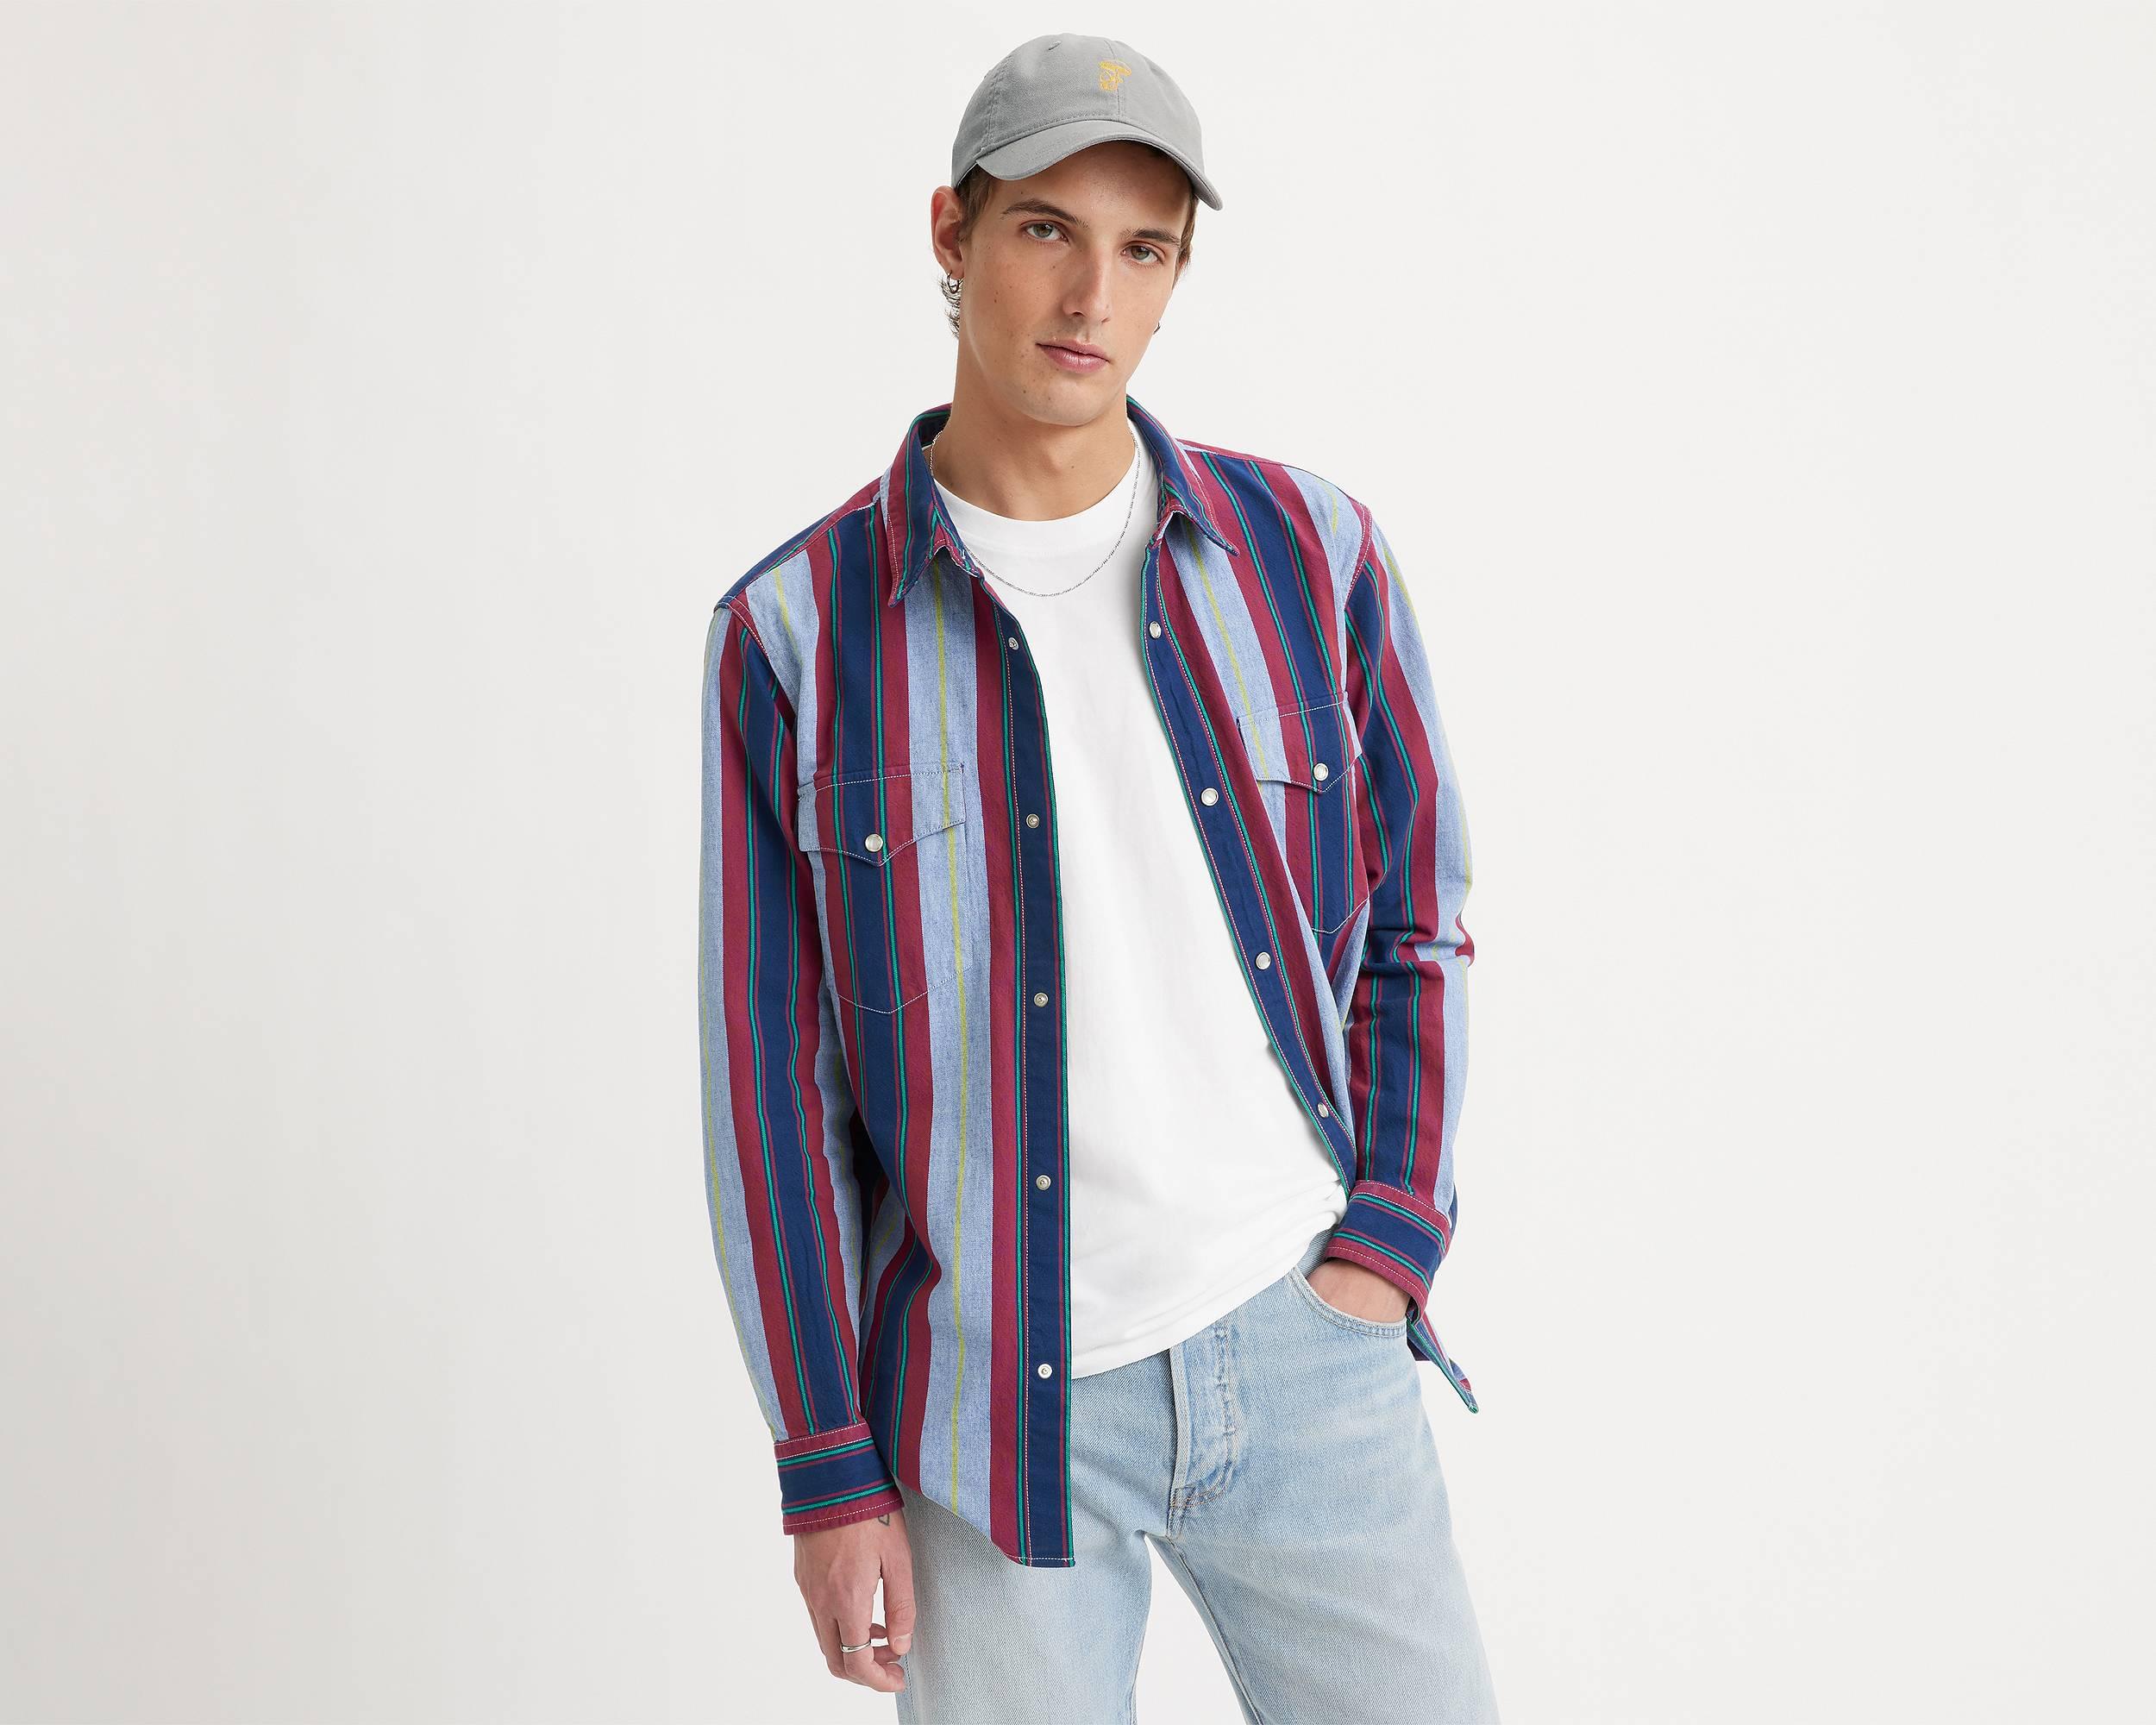 Fit Western Levi's Jeans, Jackets & Clothing